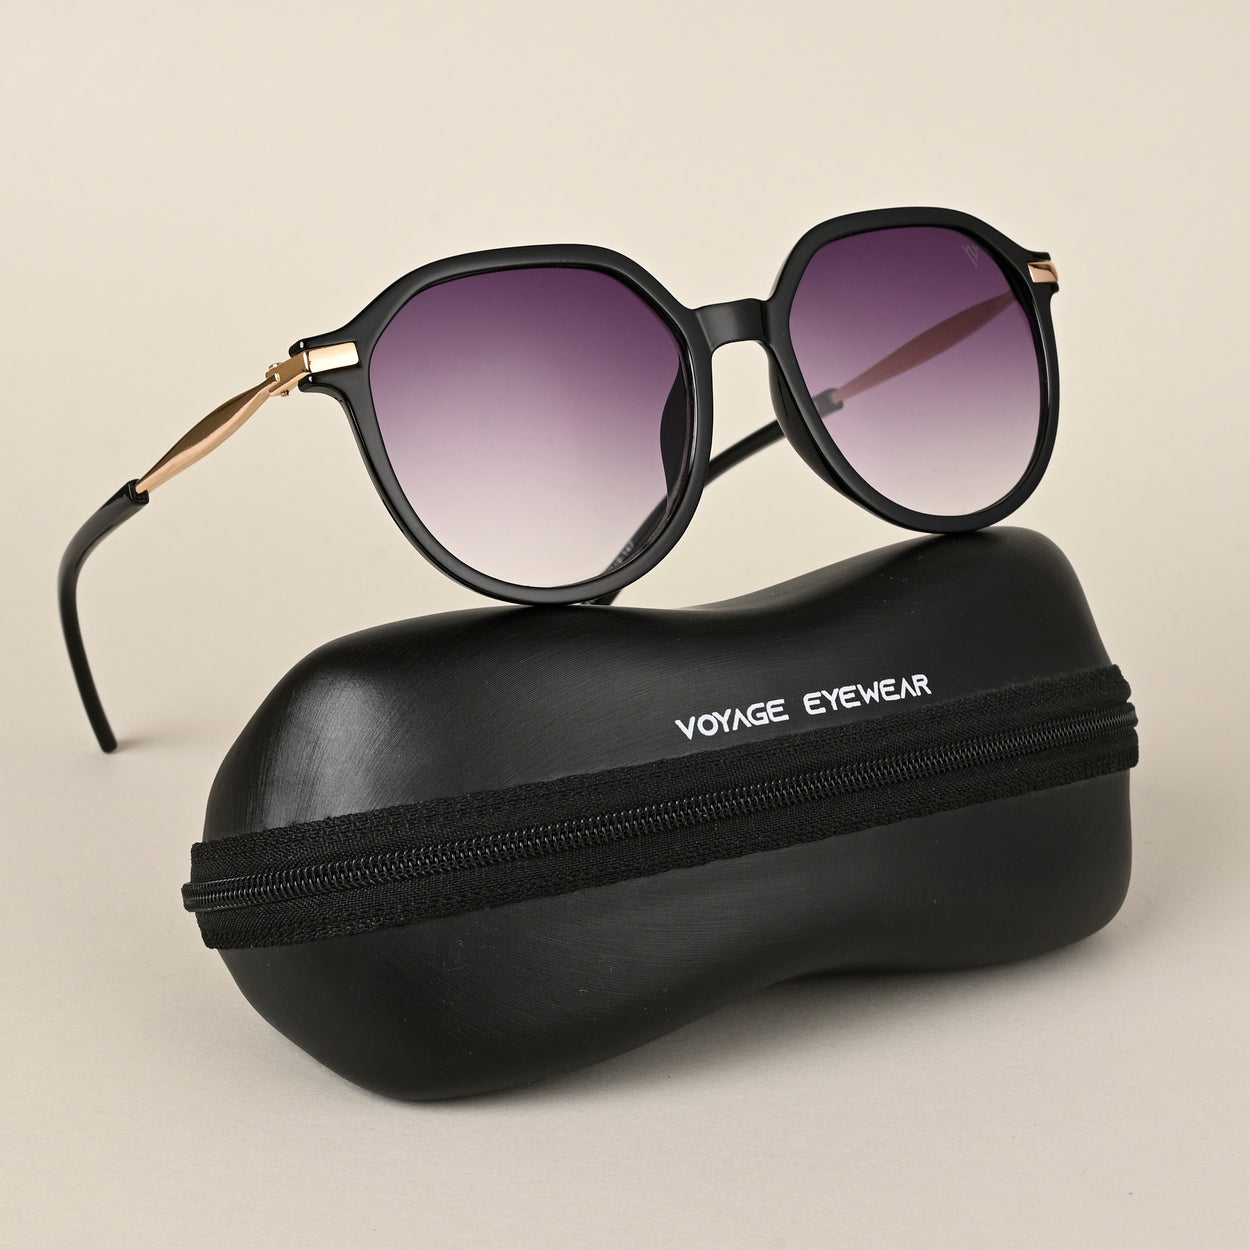 Voyage Purple & Clear Round Sunglasses for Women (A30104MG4240)